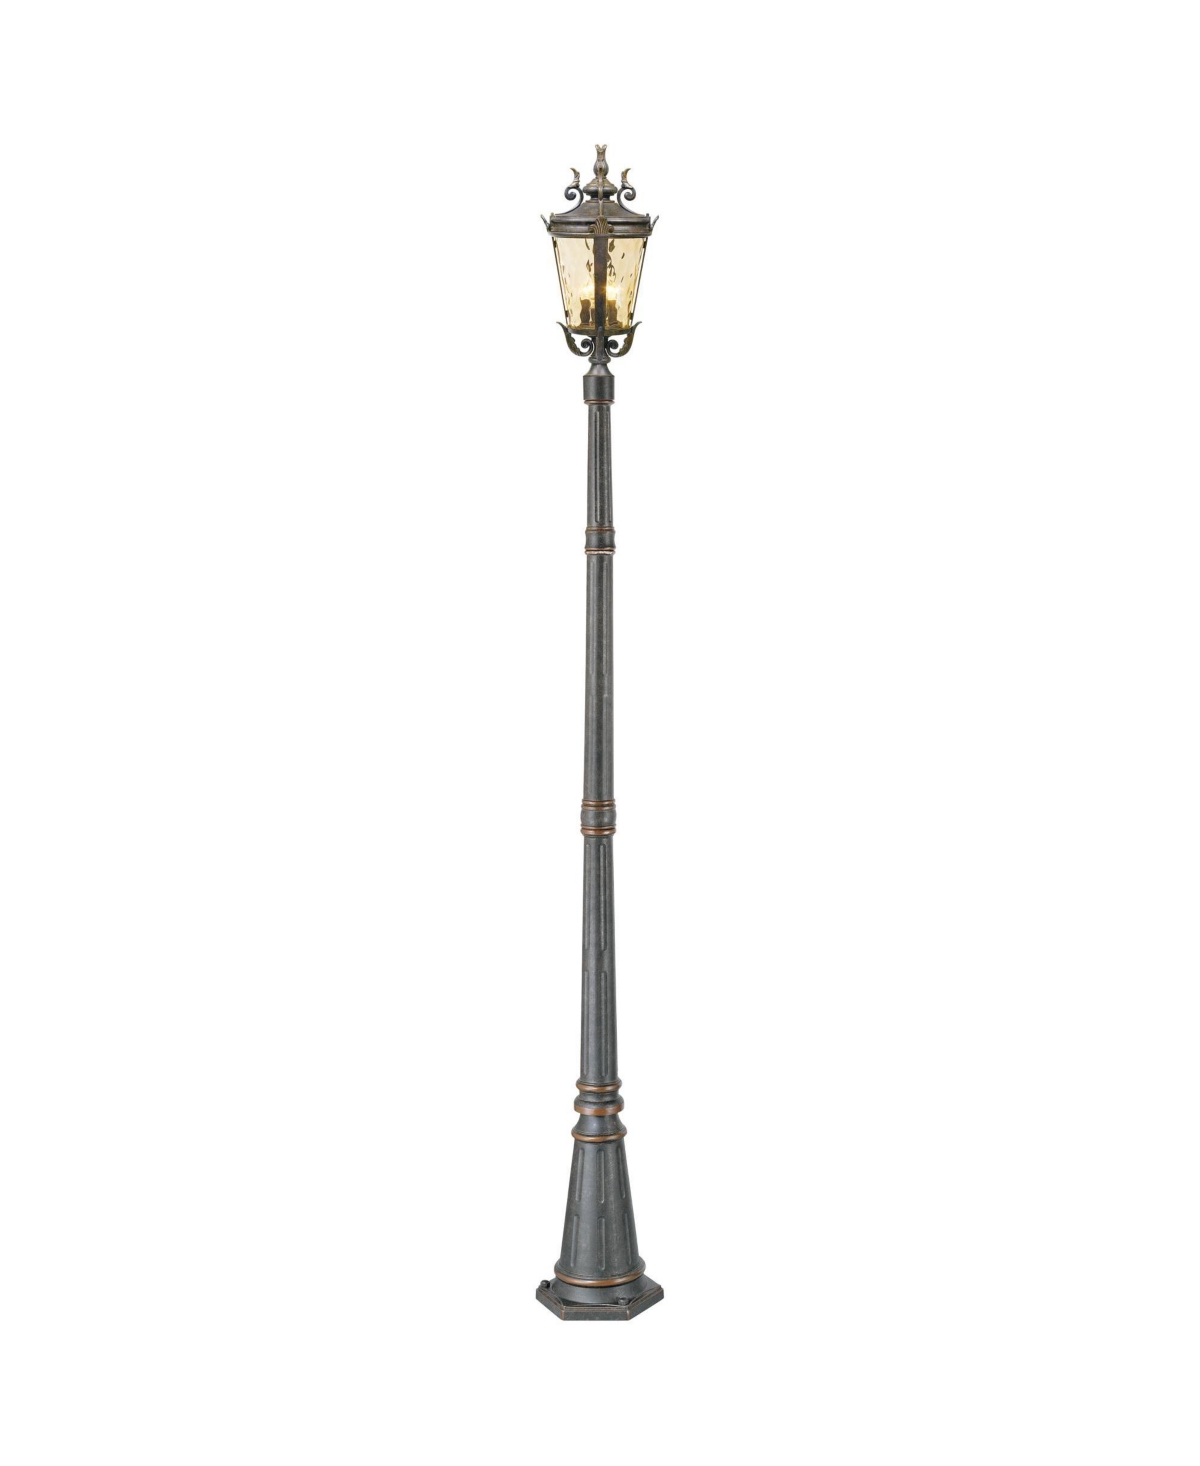 Marseille Traditional Outdoor Post Light with Flat Base Pole Veranda Bronze 99 3/4" Champagne Hammered Glass for Exterior House Porch Patio Outside De